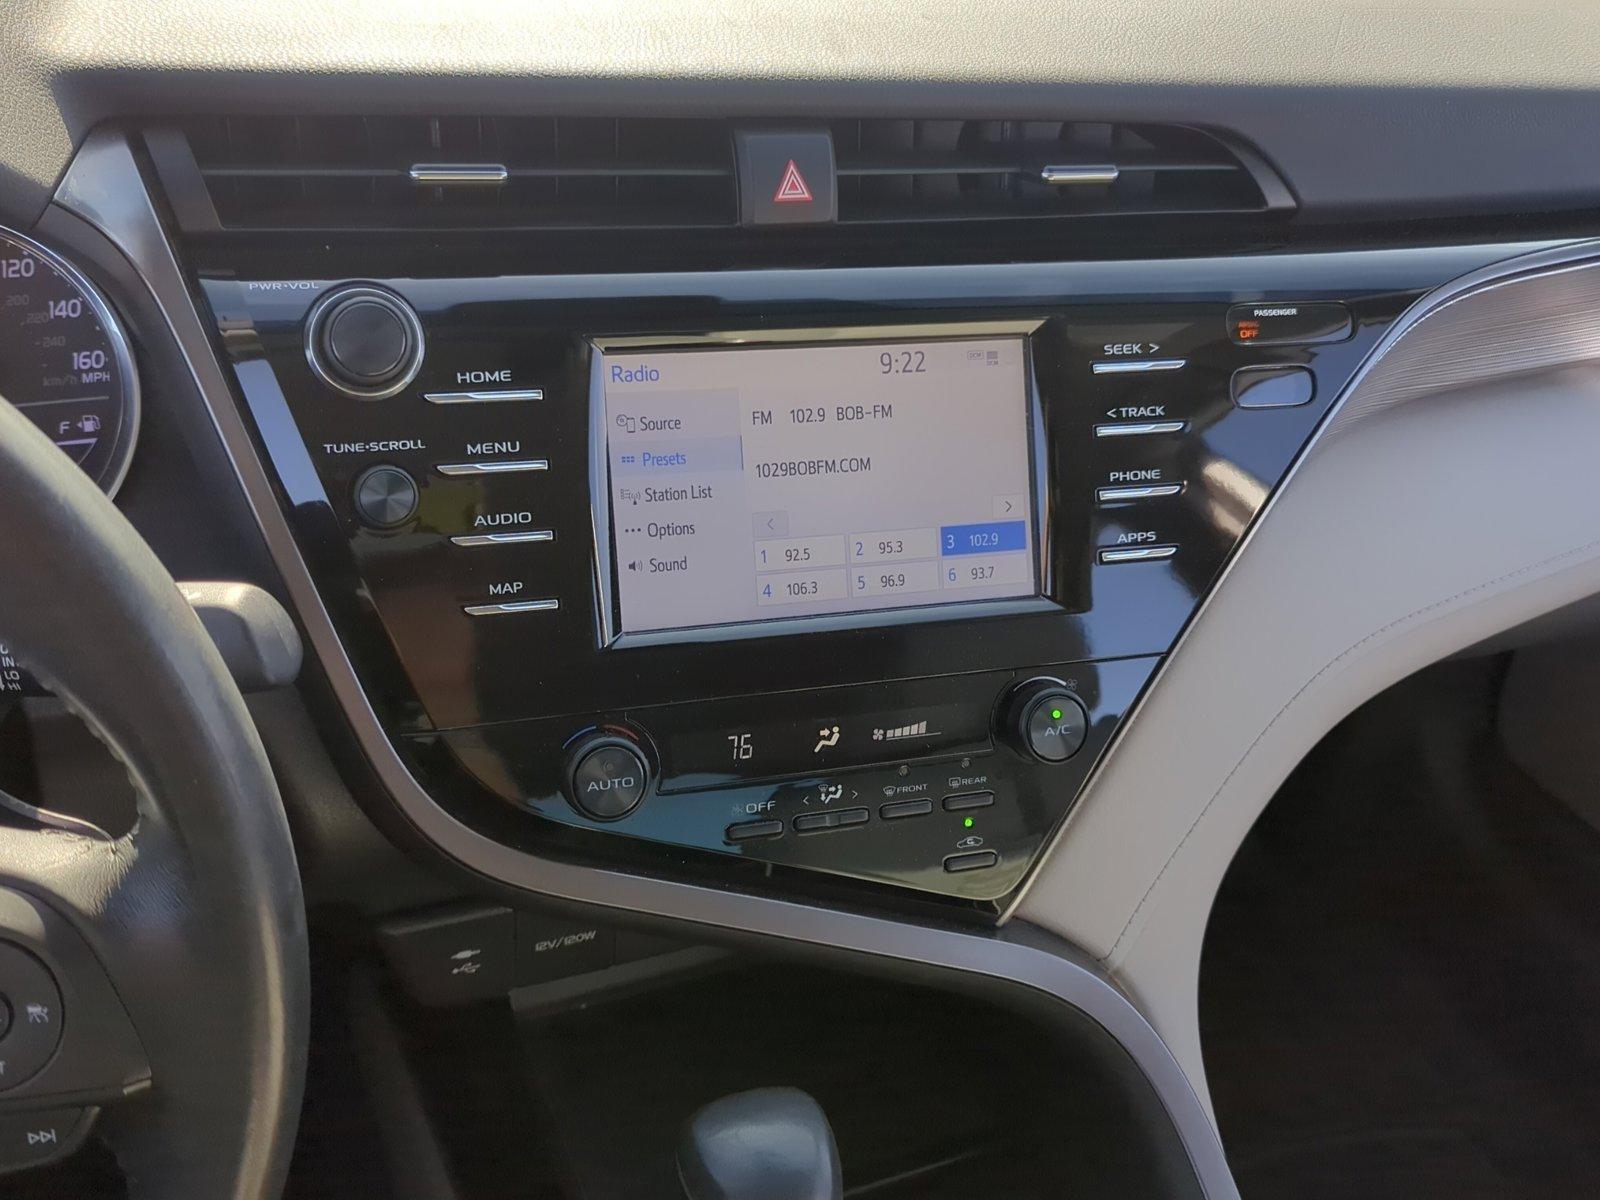 2019 Toyota Camry Vehicle Photo in Ft. Myers, FL 33907